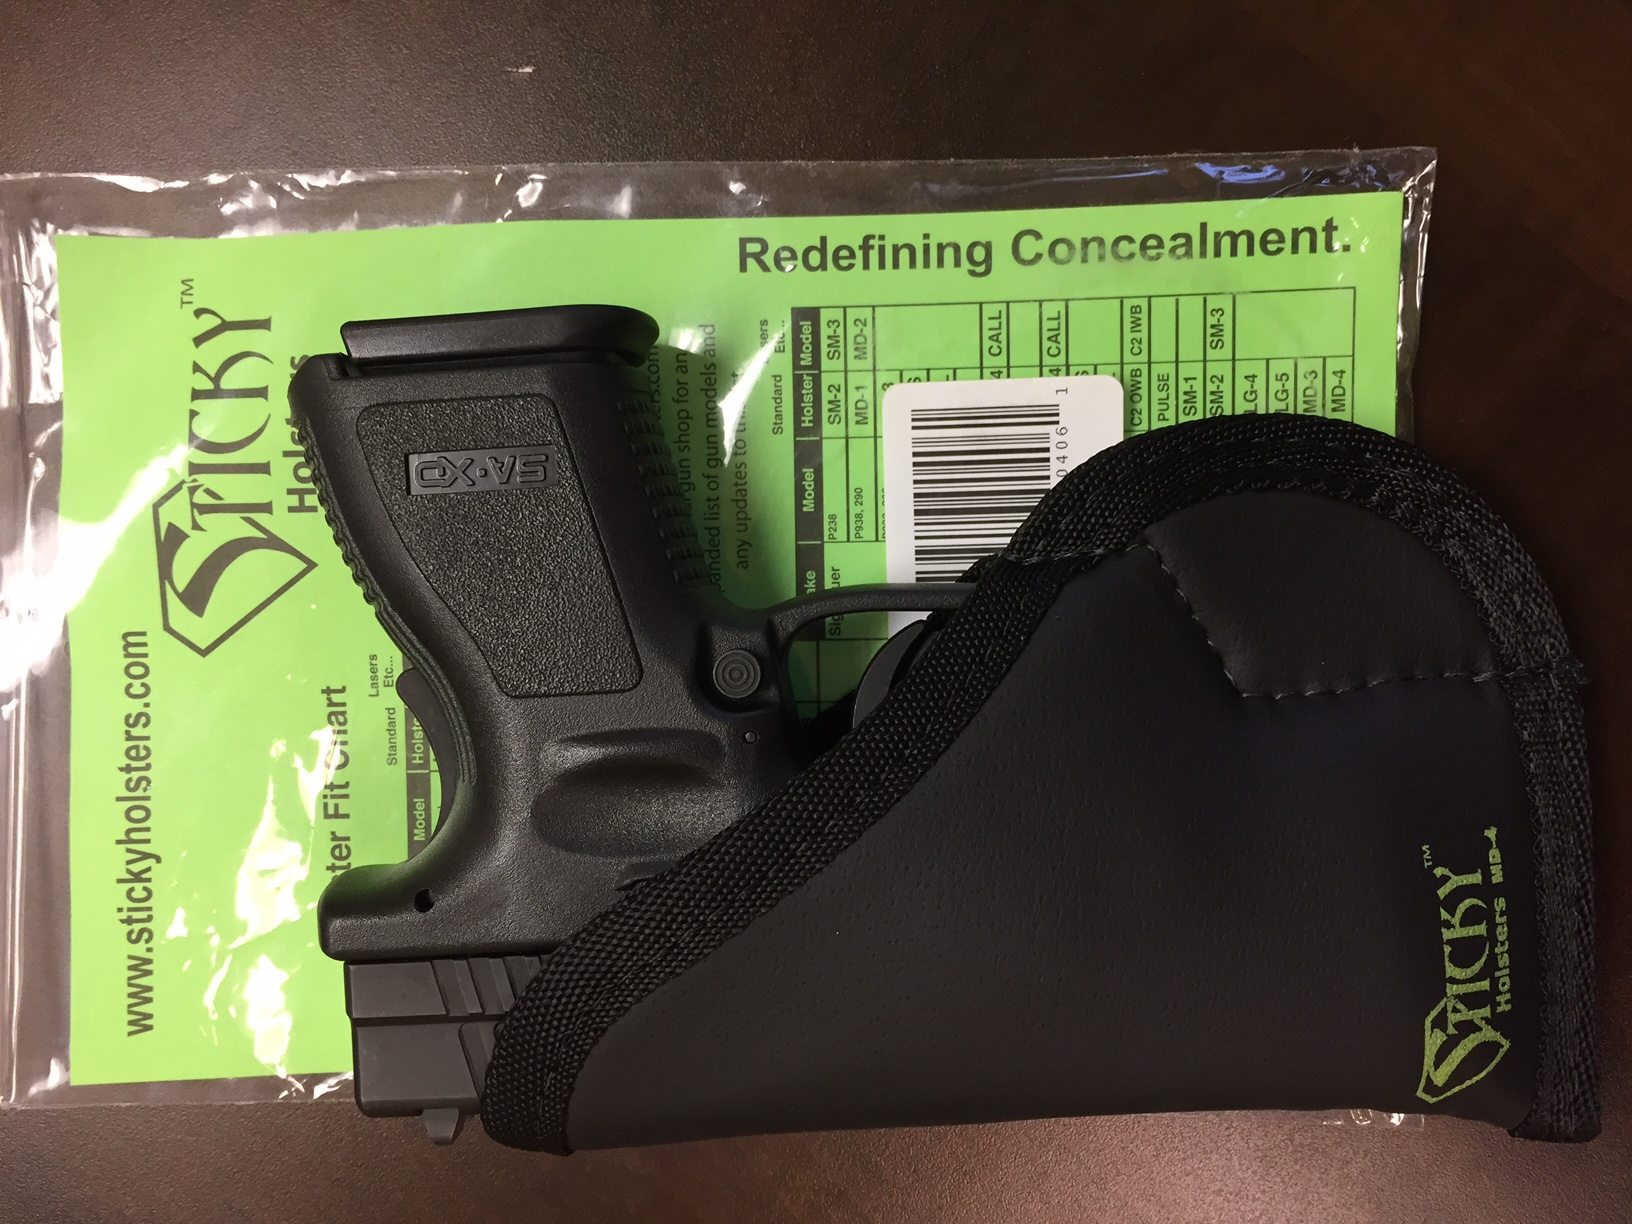 Sticky Holster MD-4 IWB/Pocket Concealed for Glock 43/S&W Shield/Springfield XDS 